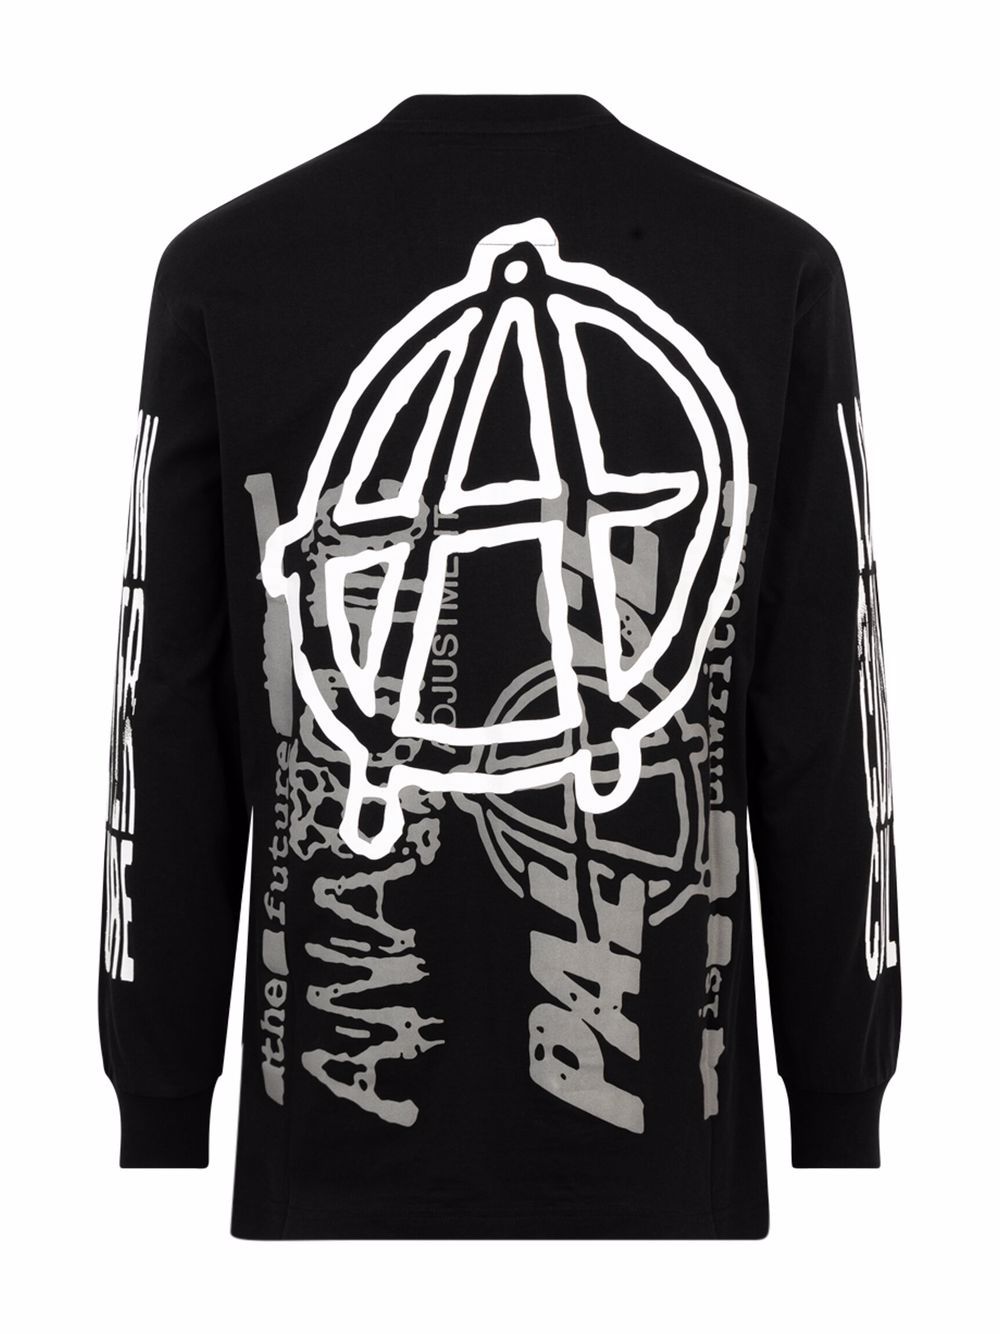 Image 2 of Palace x Anarchic Adjustment Counter Couture long-sleeve T-shirt